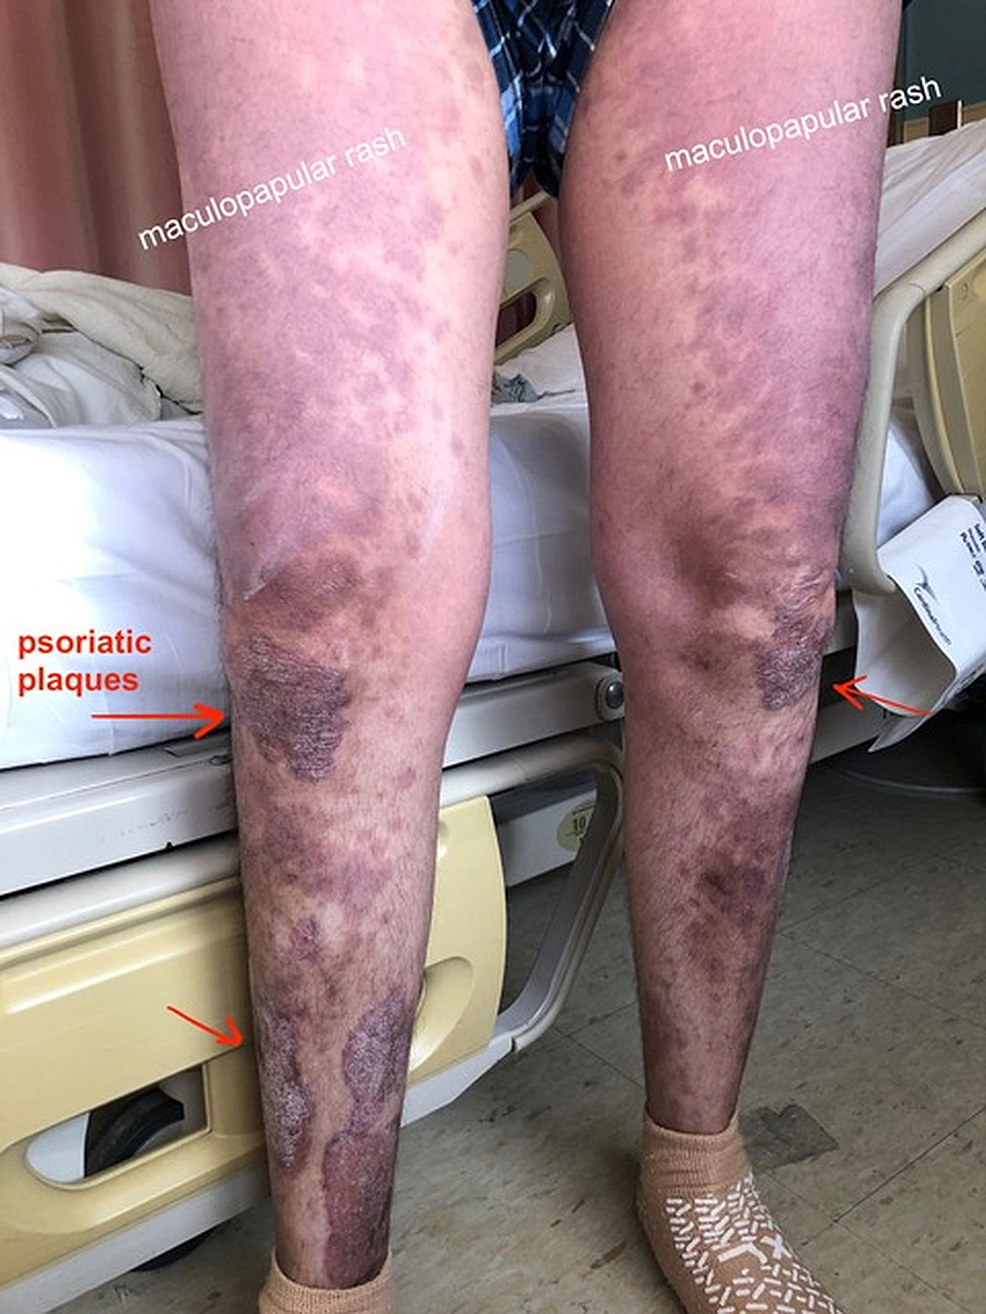 Maculopapular-rash-on-the-lower-extremities-with-acutely-worsening-plaque-psoriasis.